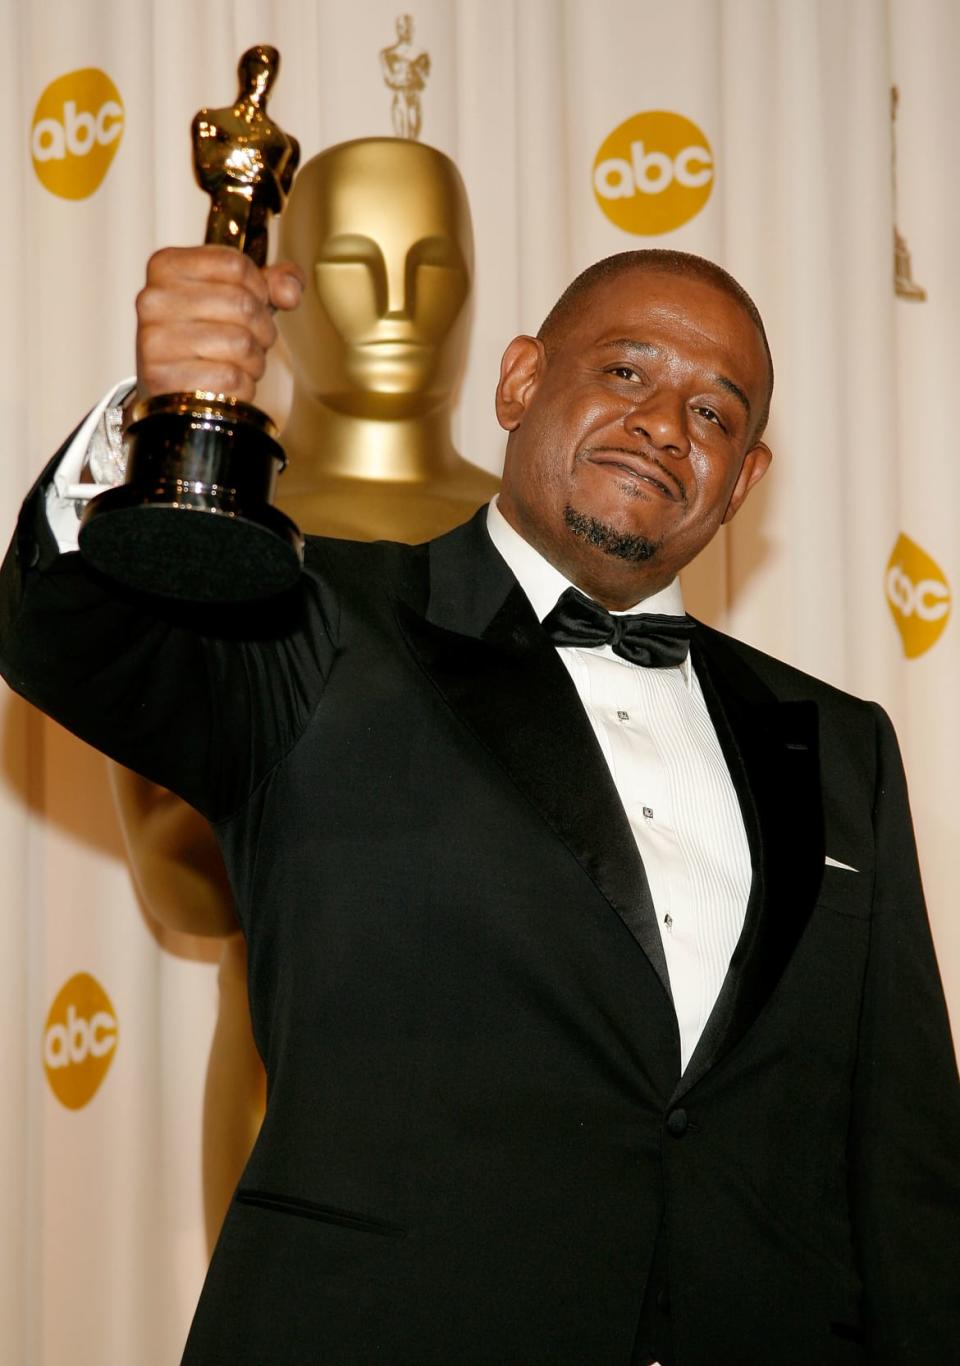 <div class="inline-image__caption"><p>Forest Whitaker poses after winning the Best Actor Oscar during the 79th Annual Academy Awards at the Kodak Theatre on February 25, 2007, in Hollywood, California. </p></div> <div class="inline-image__credit">Vince Bucci/Getty</div>